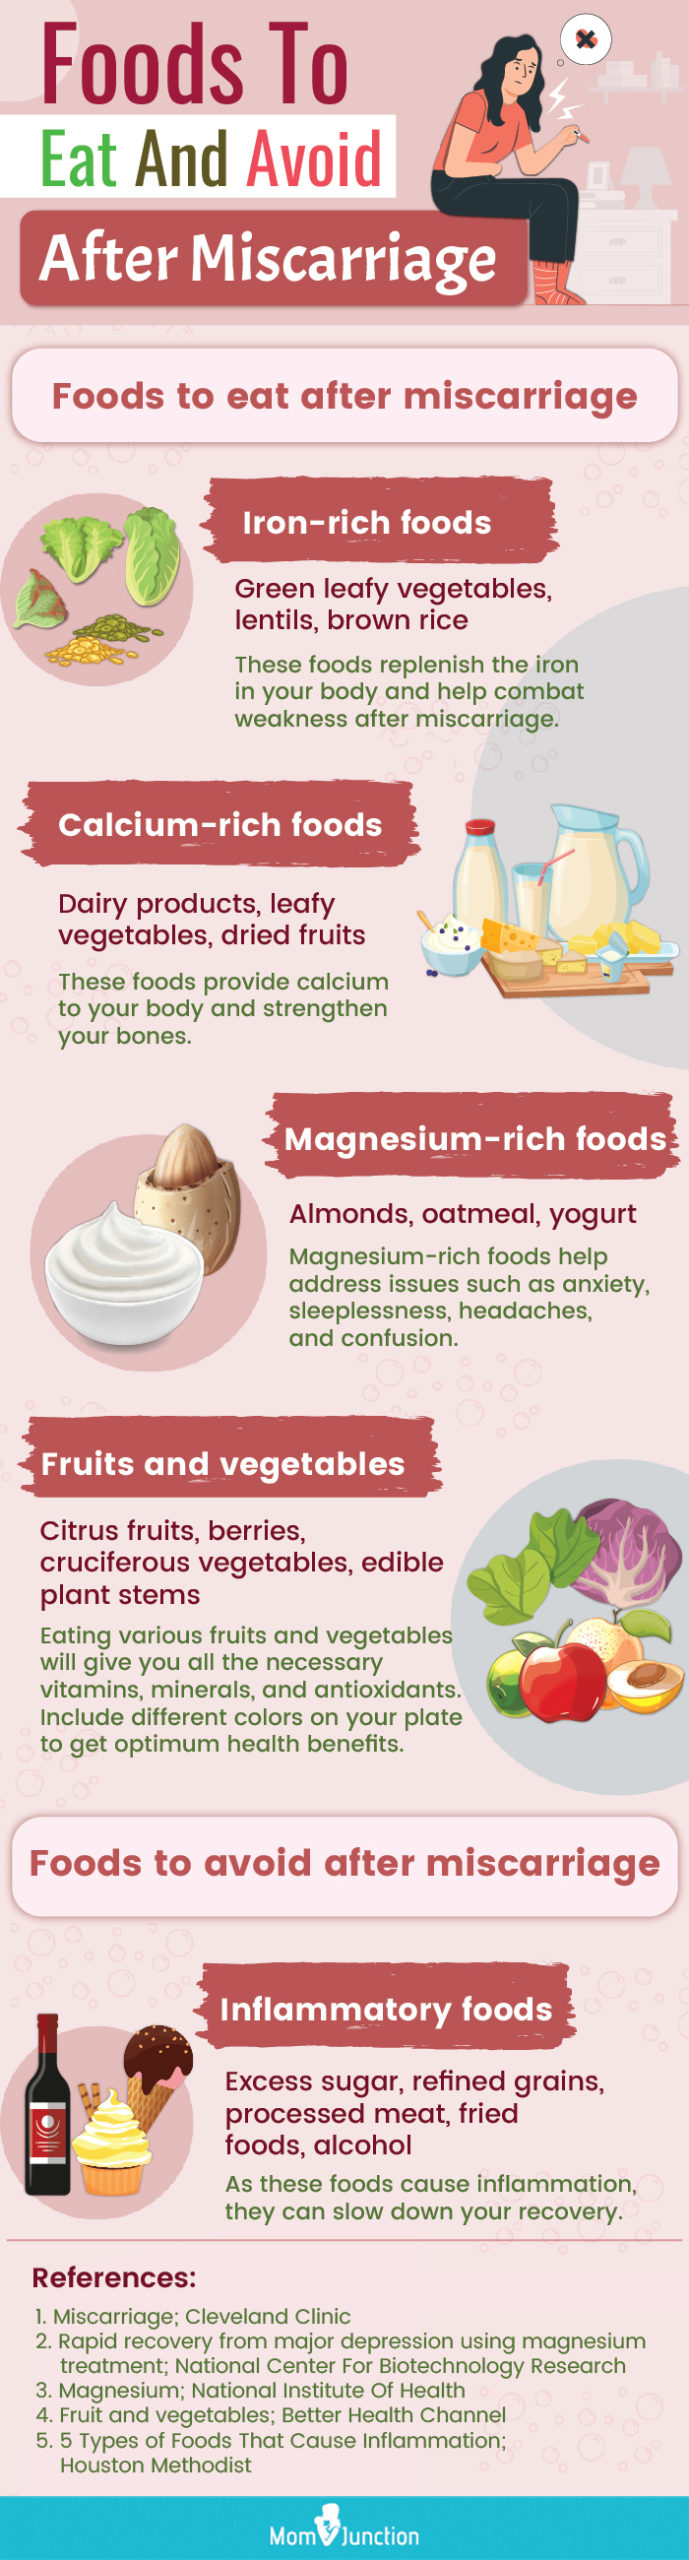 foods to eat and avoid after miscarriage (infographic)